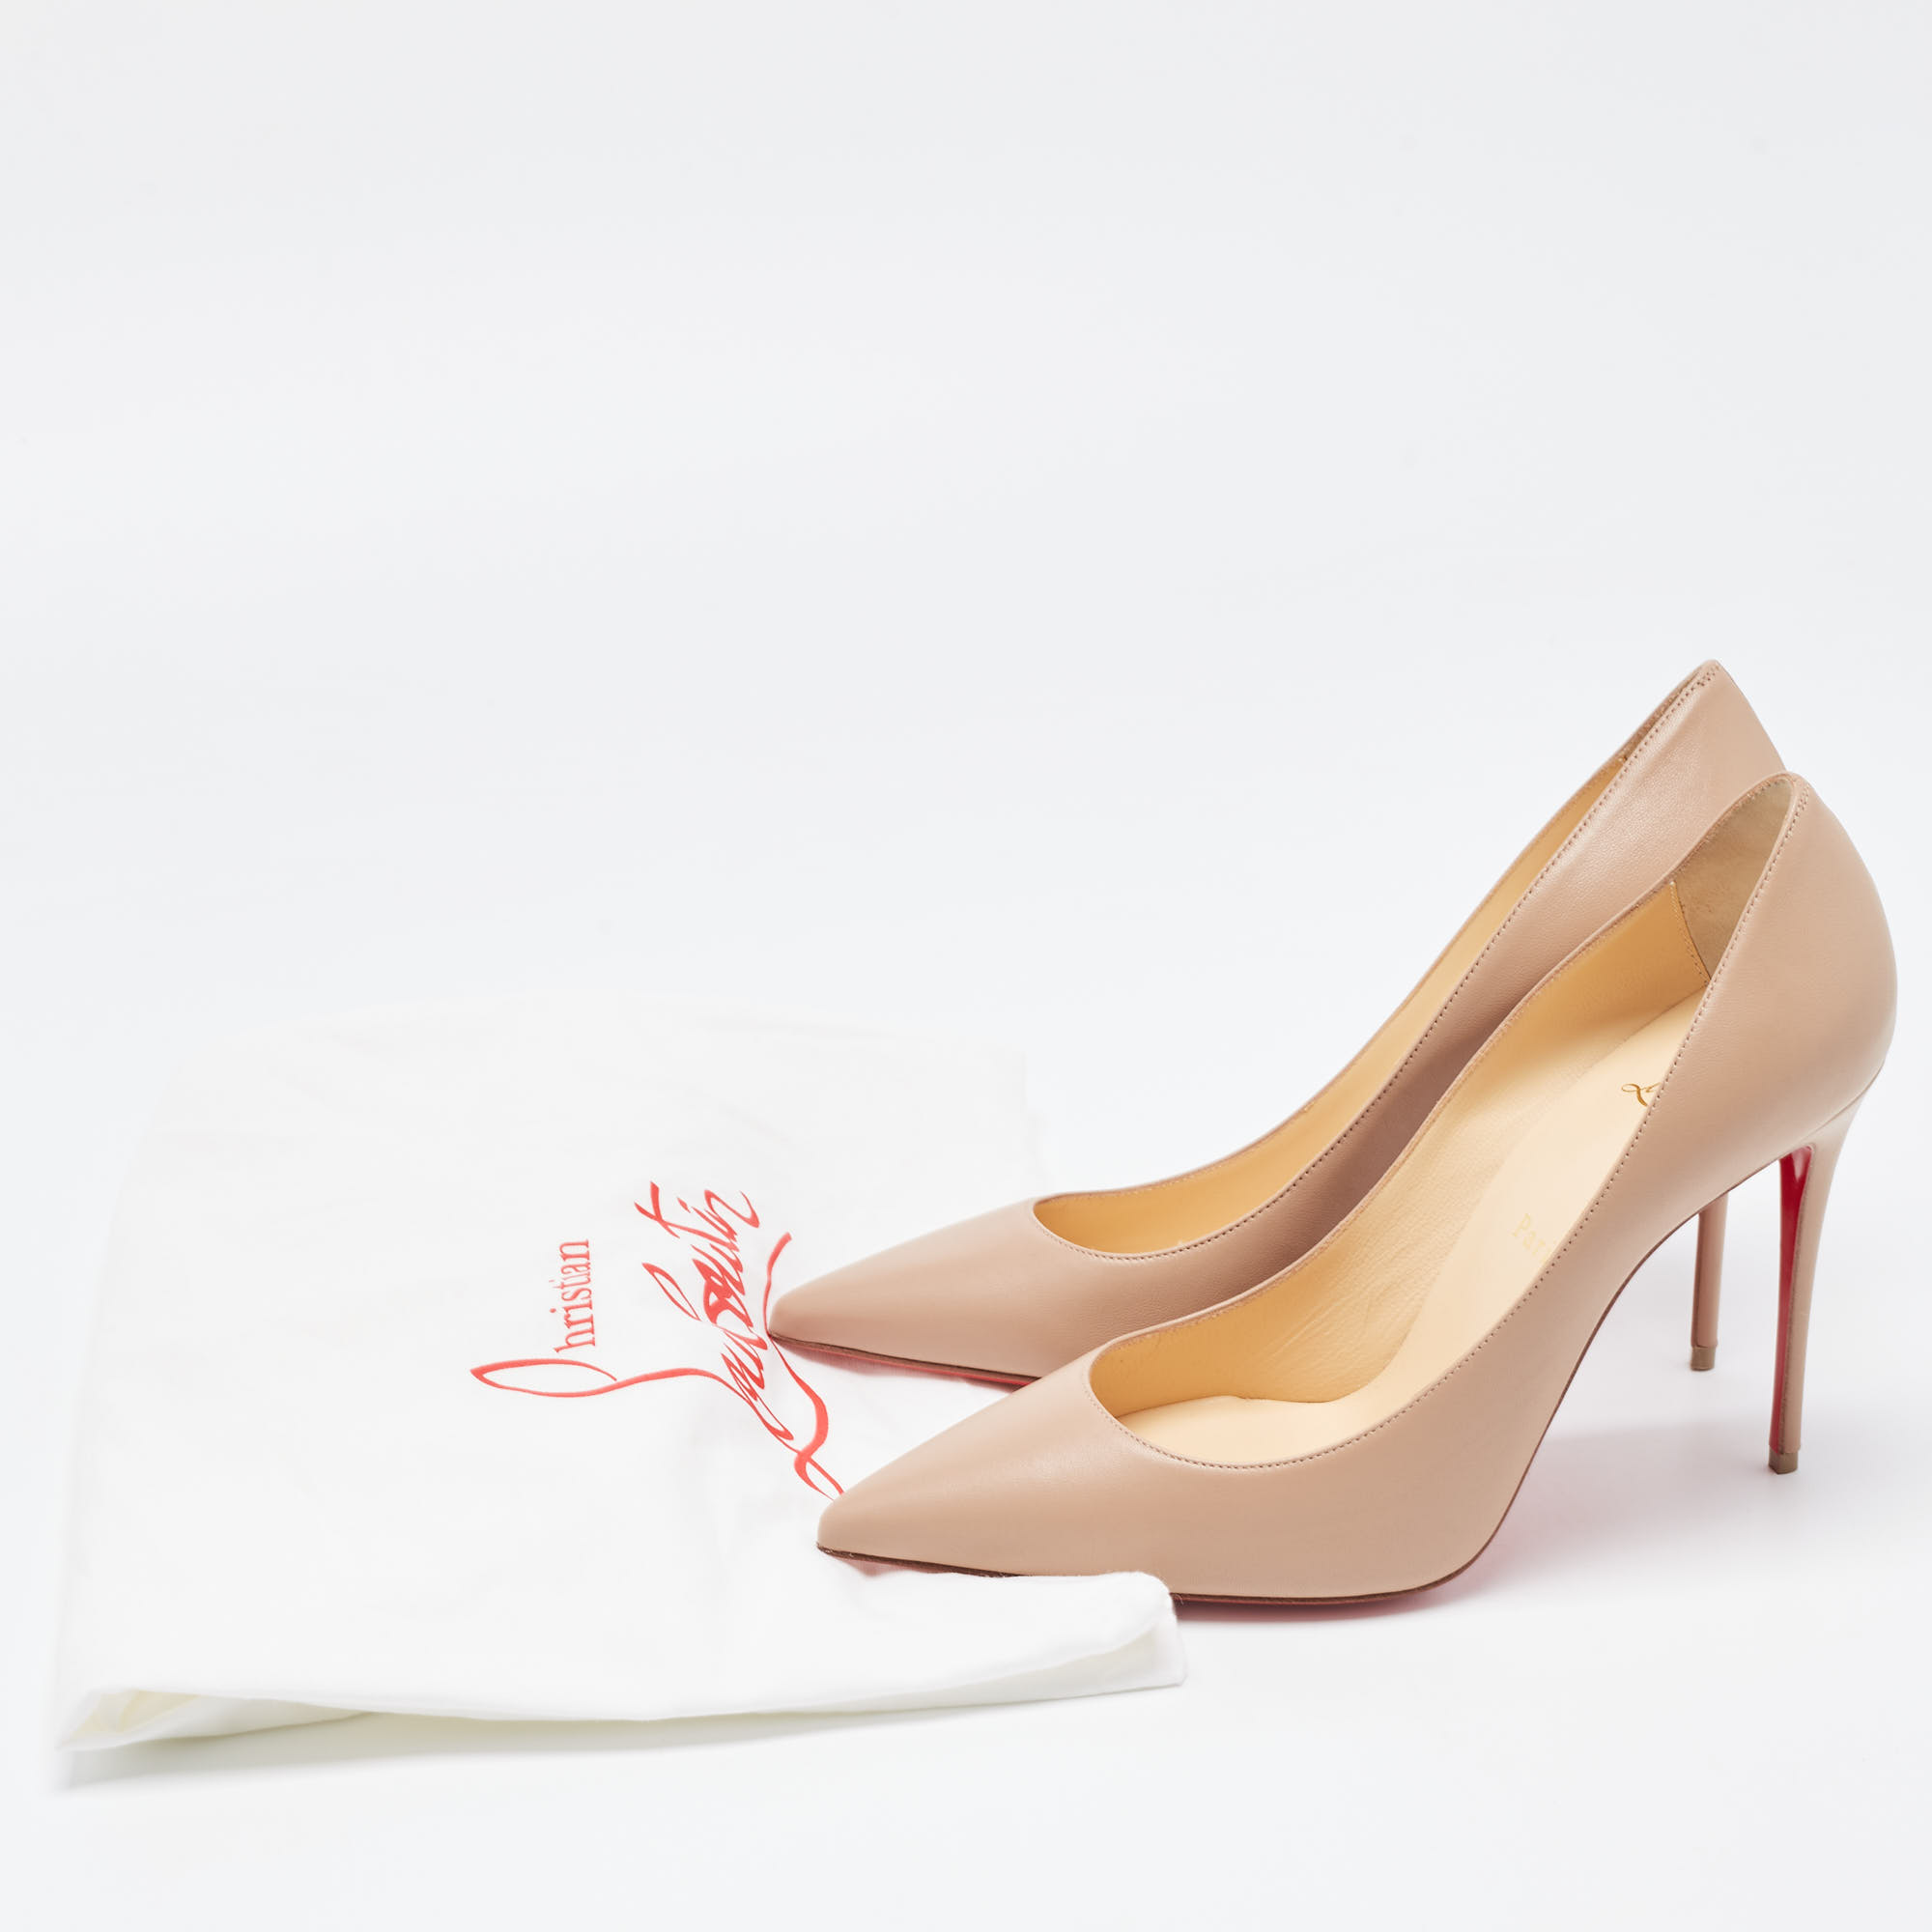 Christian Louboutin Beige Leather So Kate Pumps Size 39.5